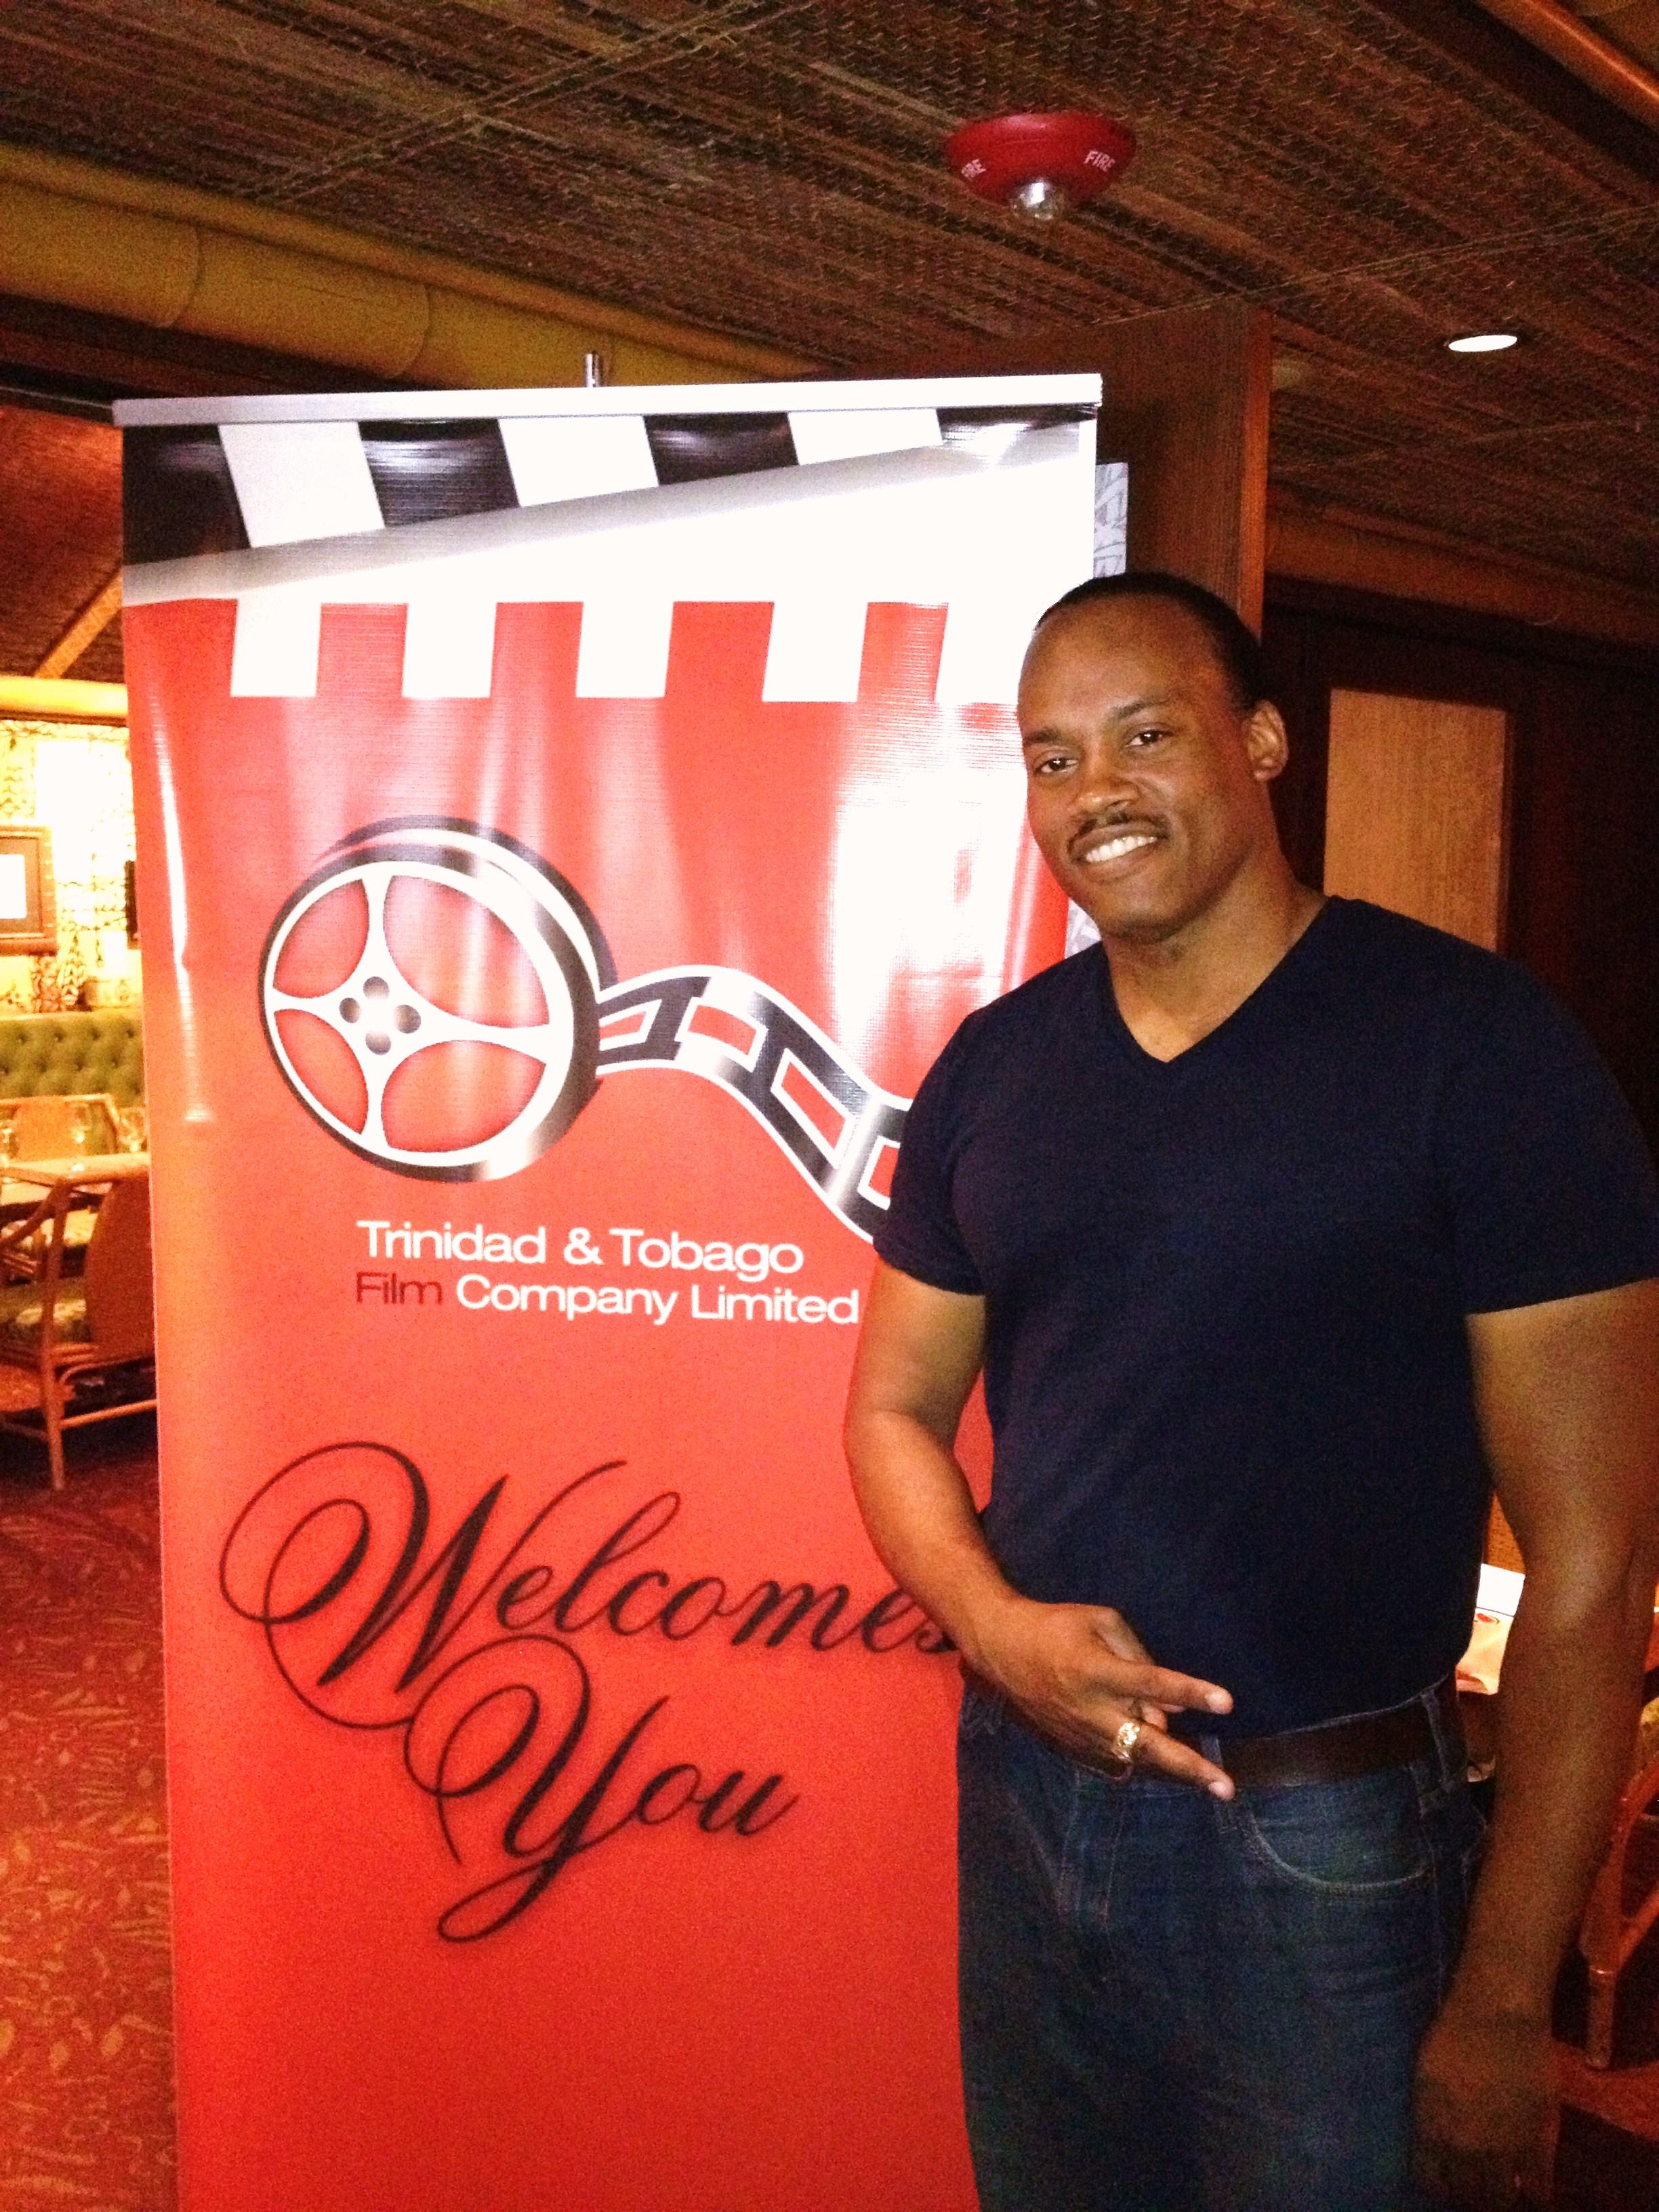 Producer/Director Greg Carter at Filmmaker luncheon provided by the Trinidad & Tobago Film Commission at Trader Vic's at L.A. Live